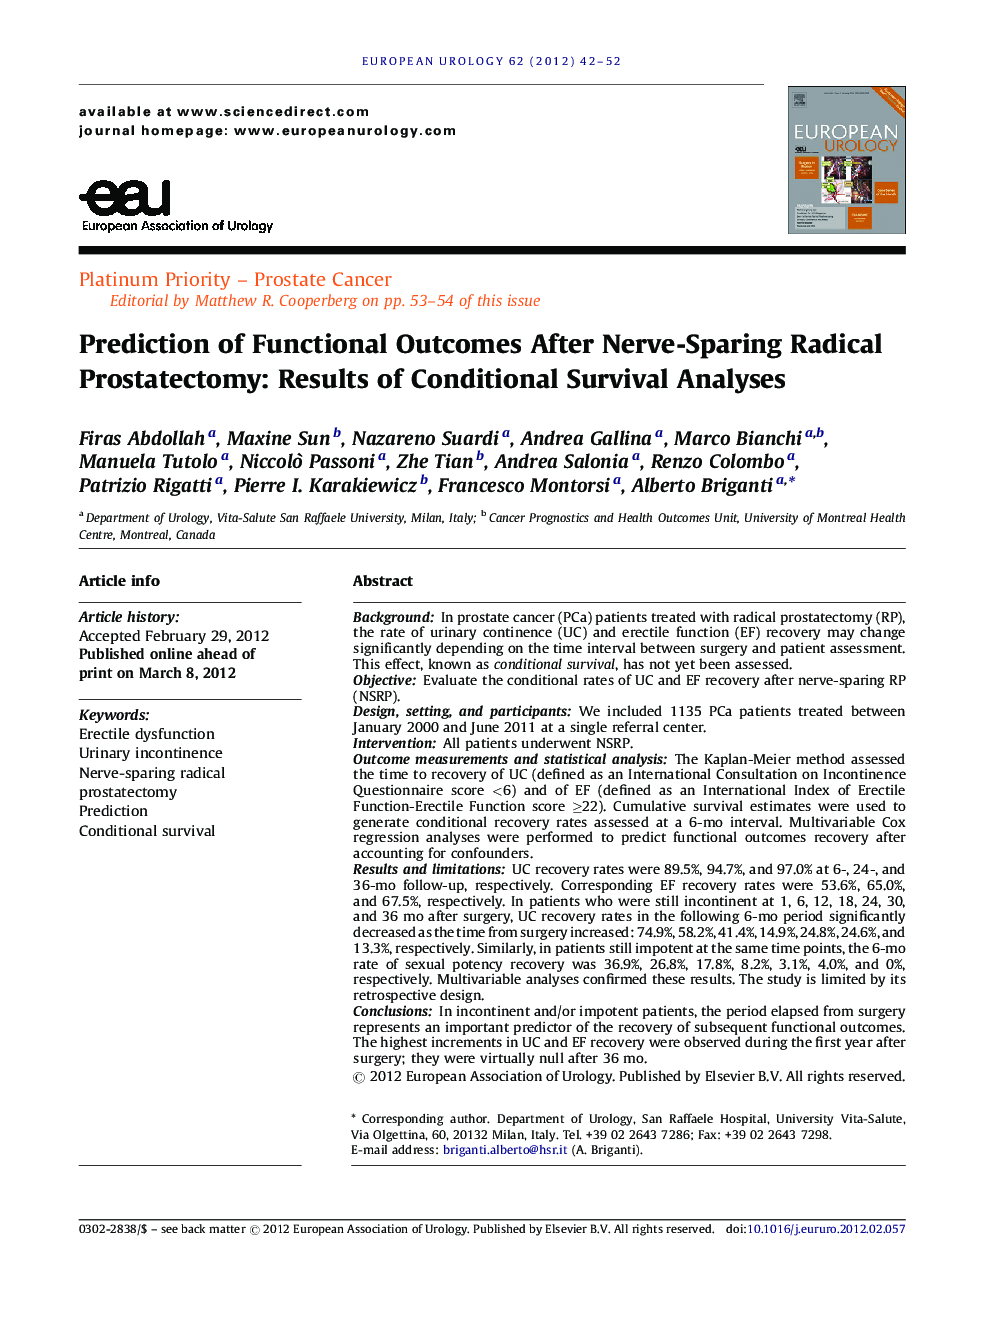 Prediction of Functional Outcomes After Nerve-Sparing Radical Prostatectomy: Results of Conditional Survival Analyses